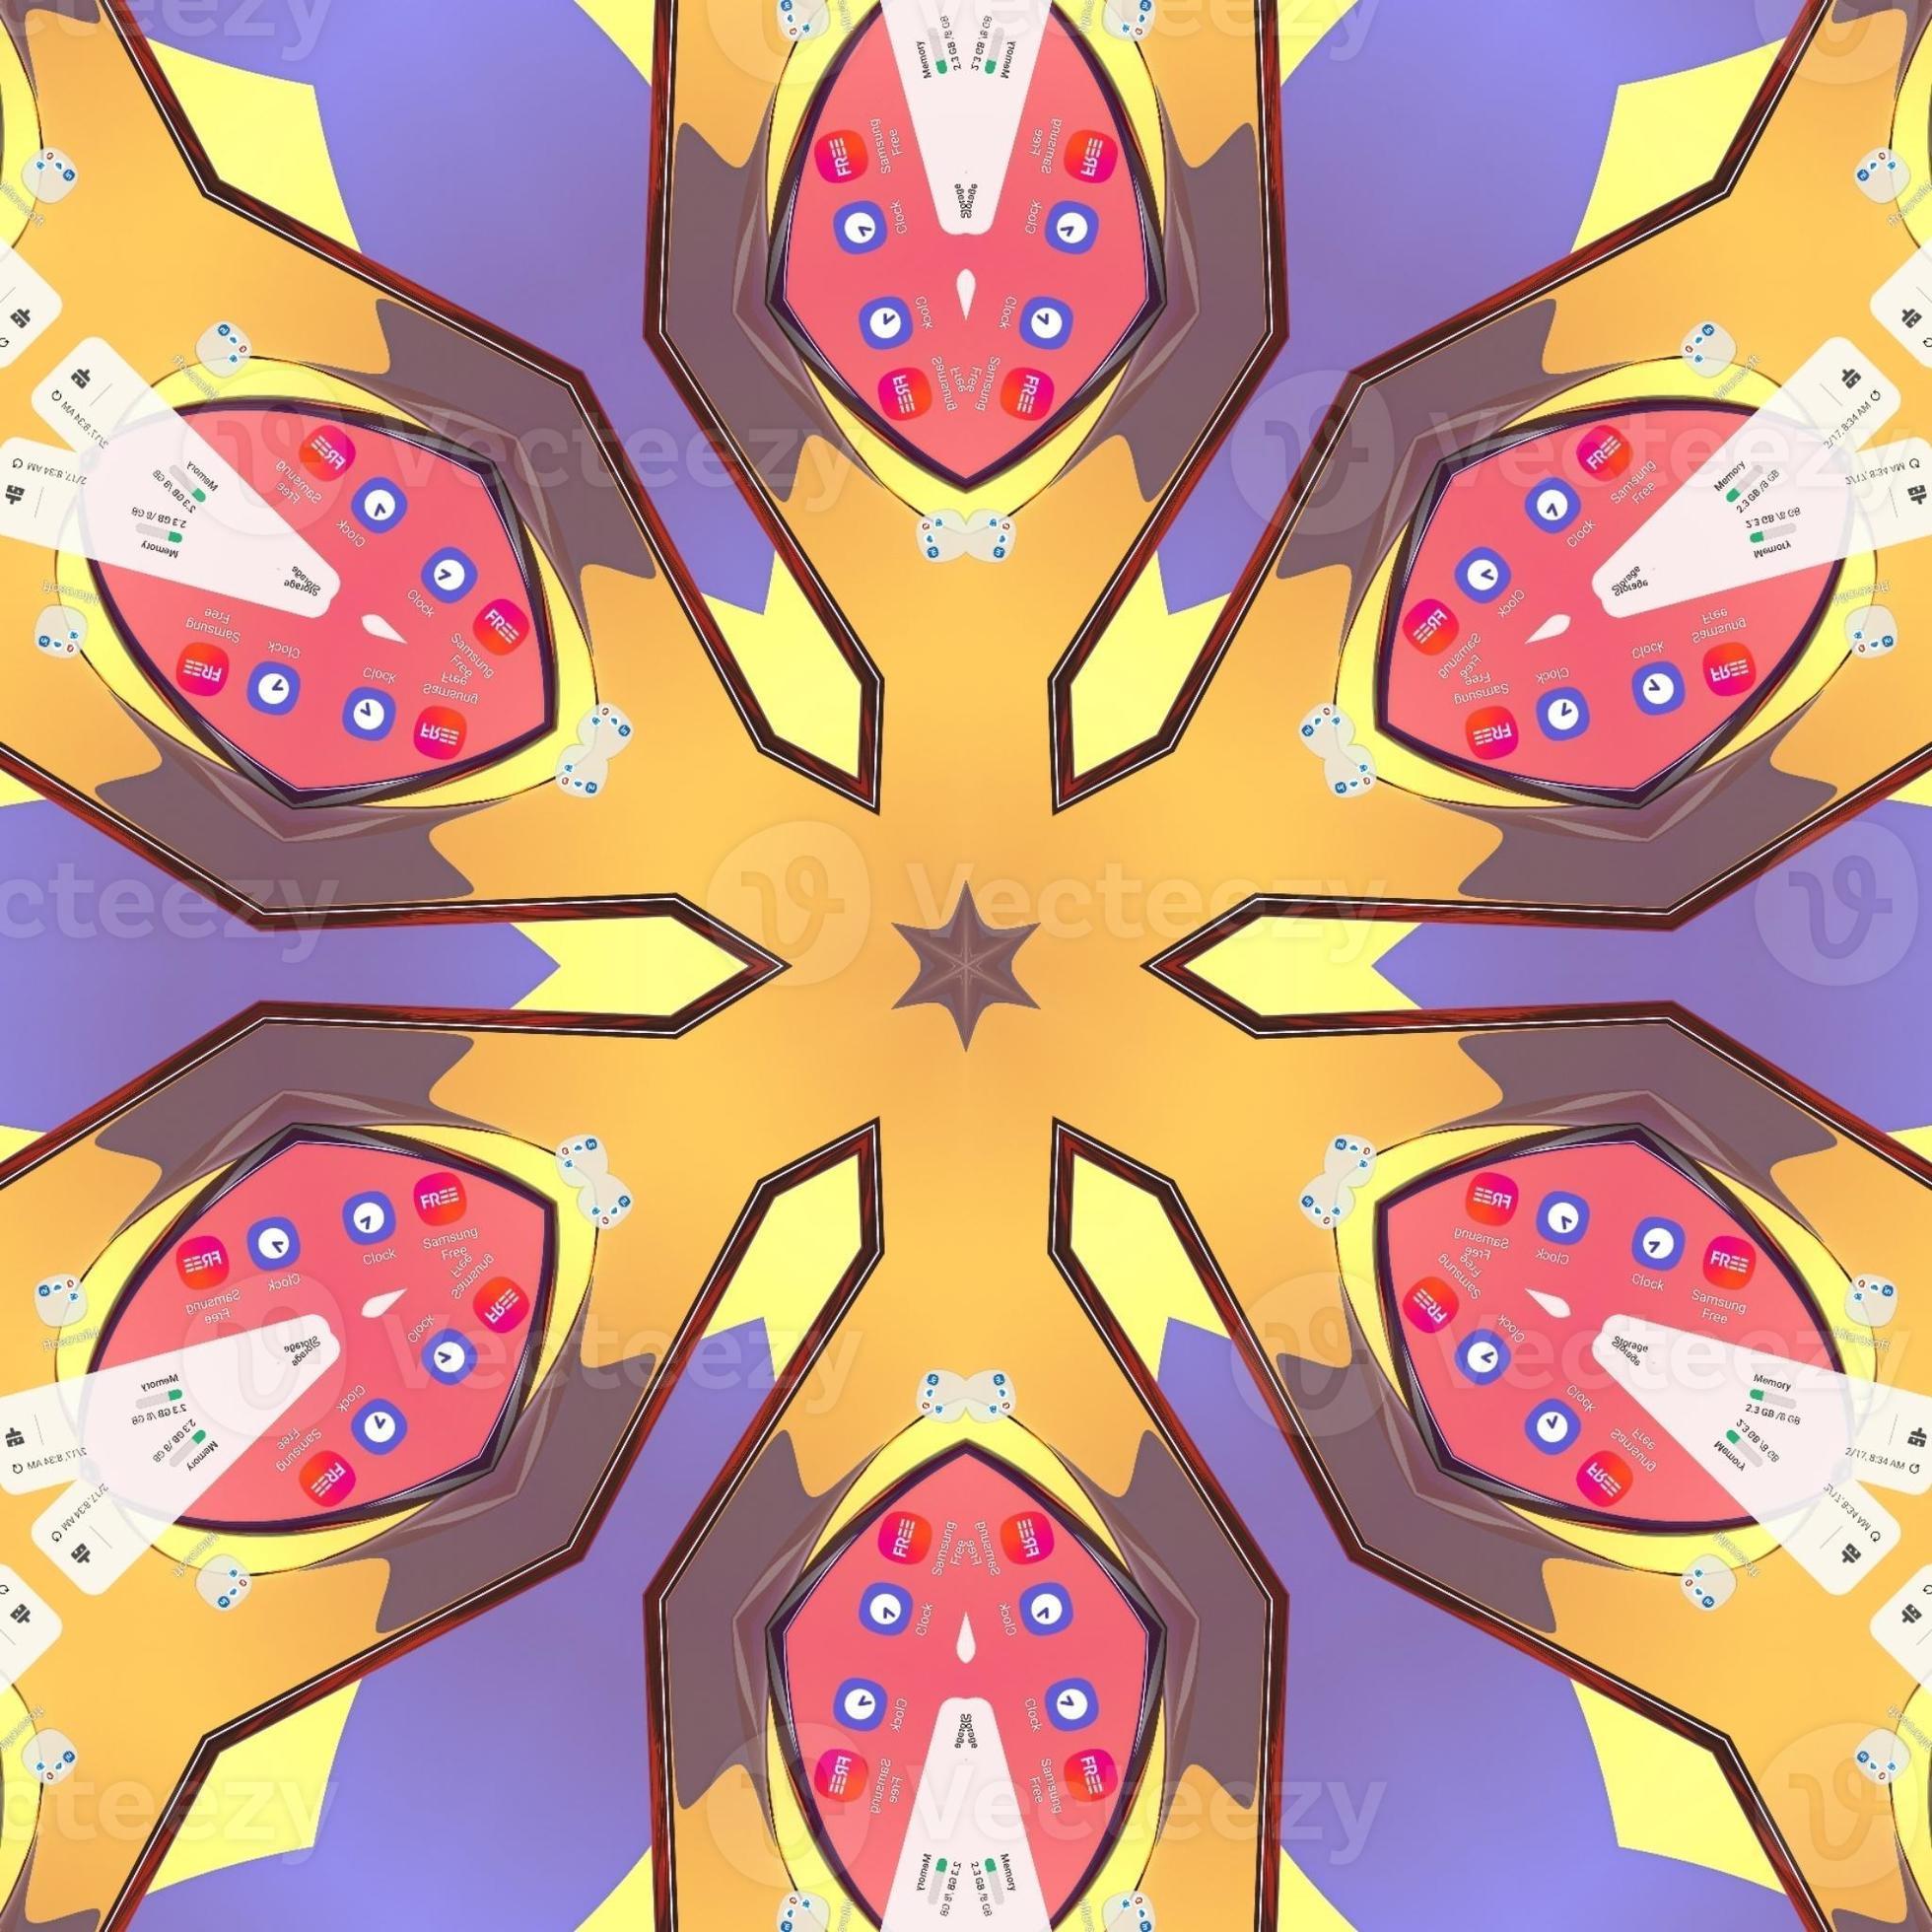 A colorful, geometric pattern with stars and flowers - Trippy